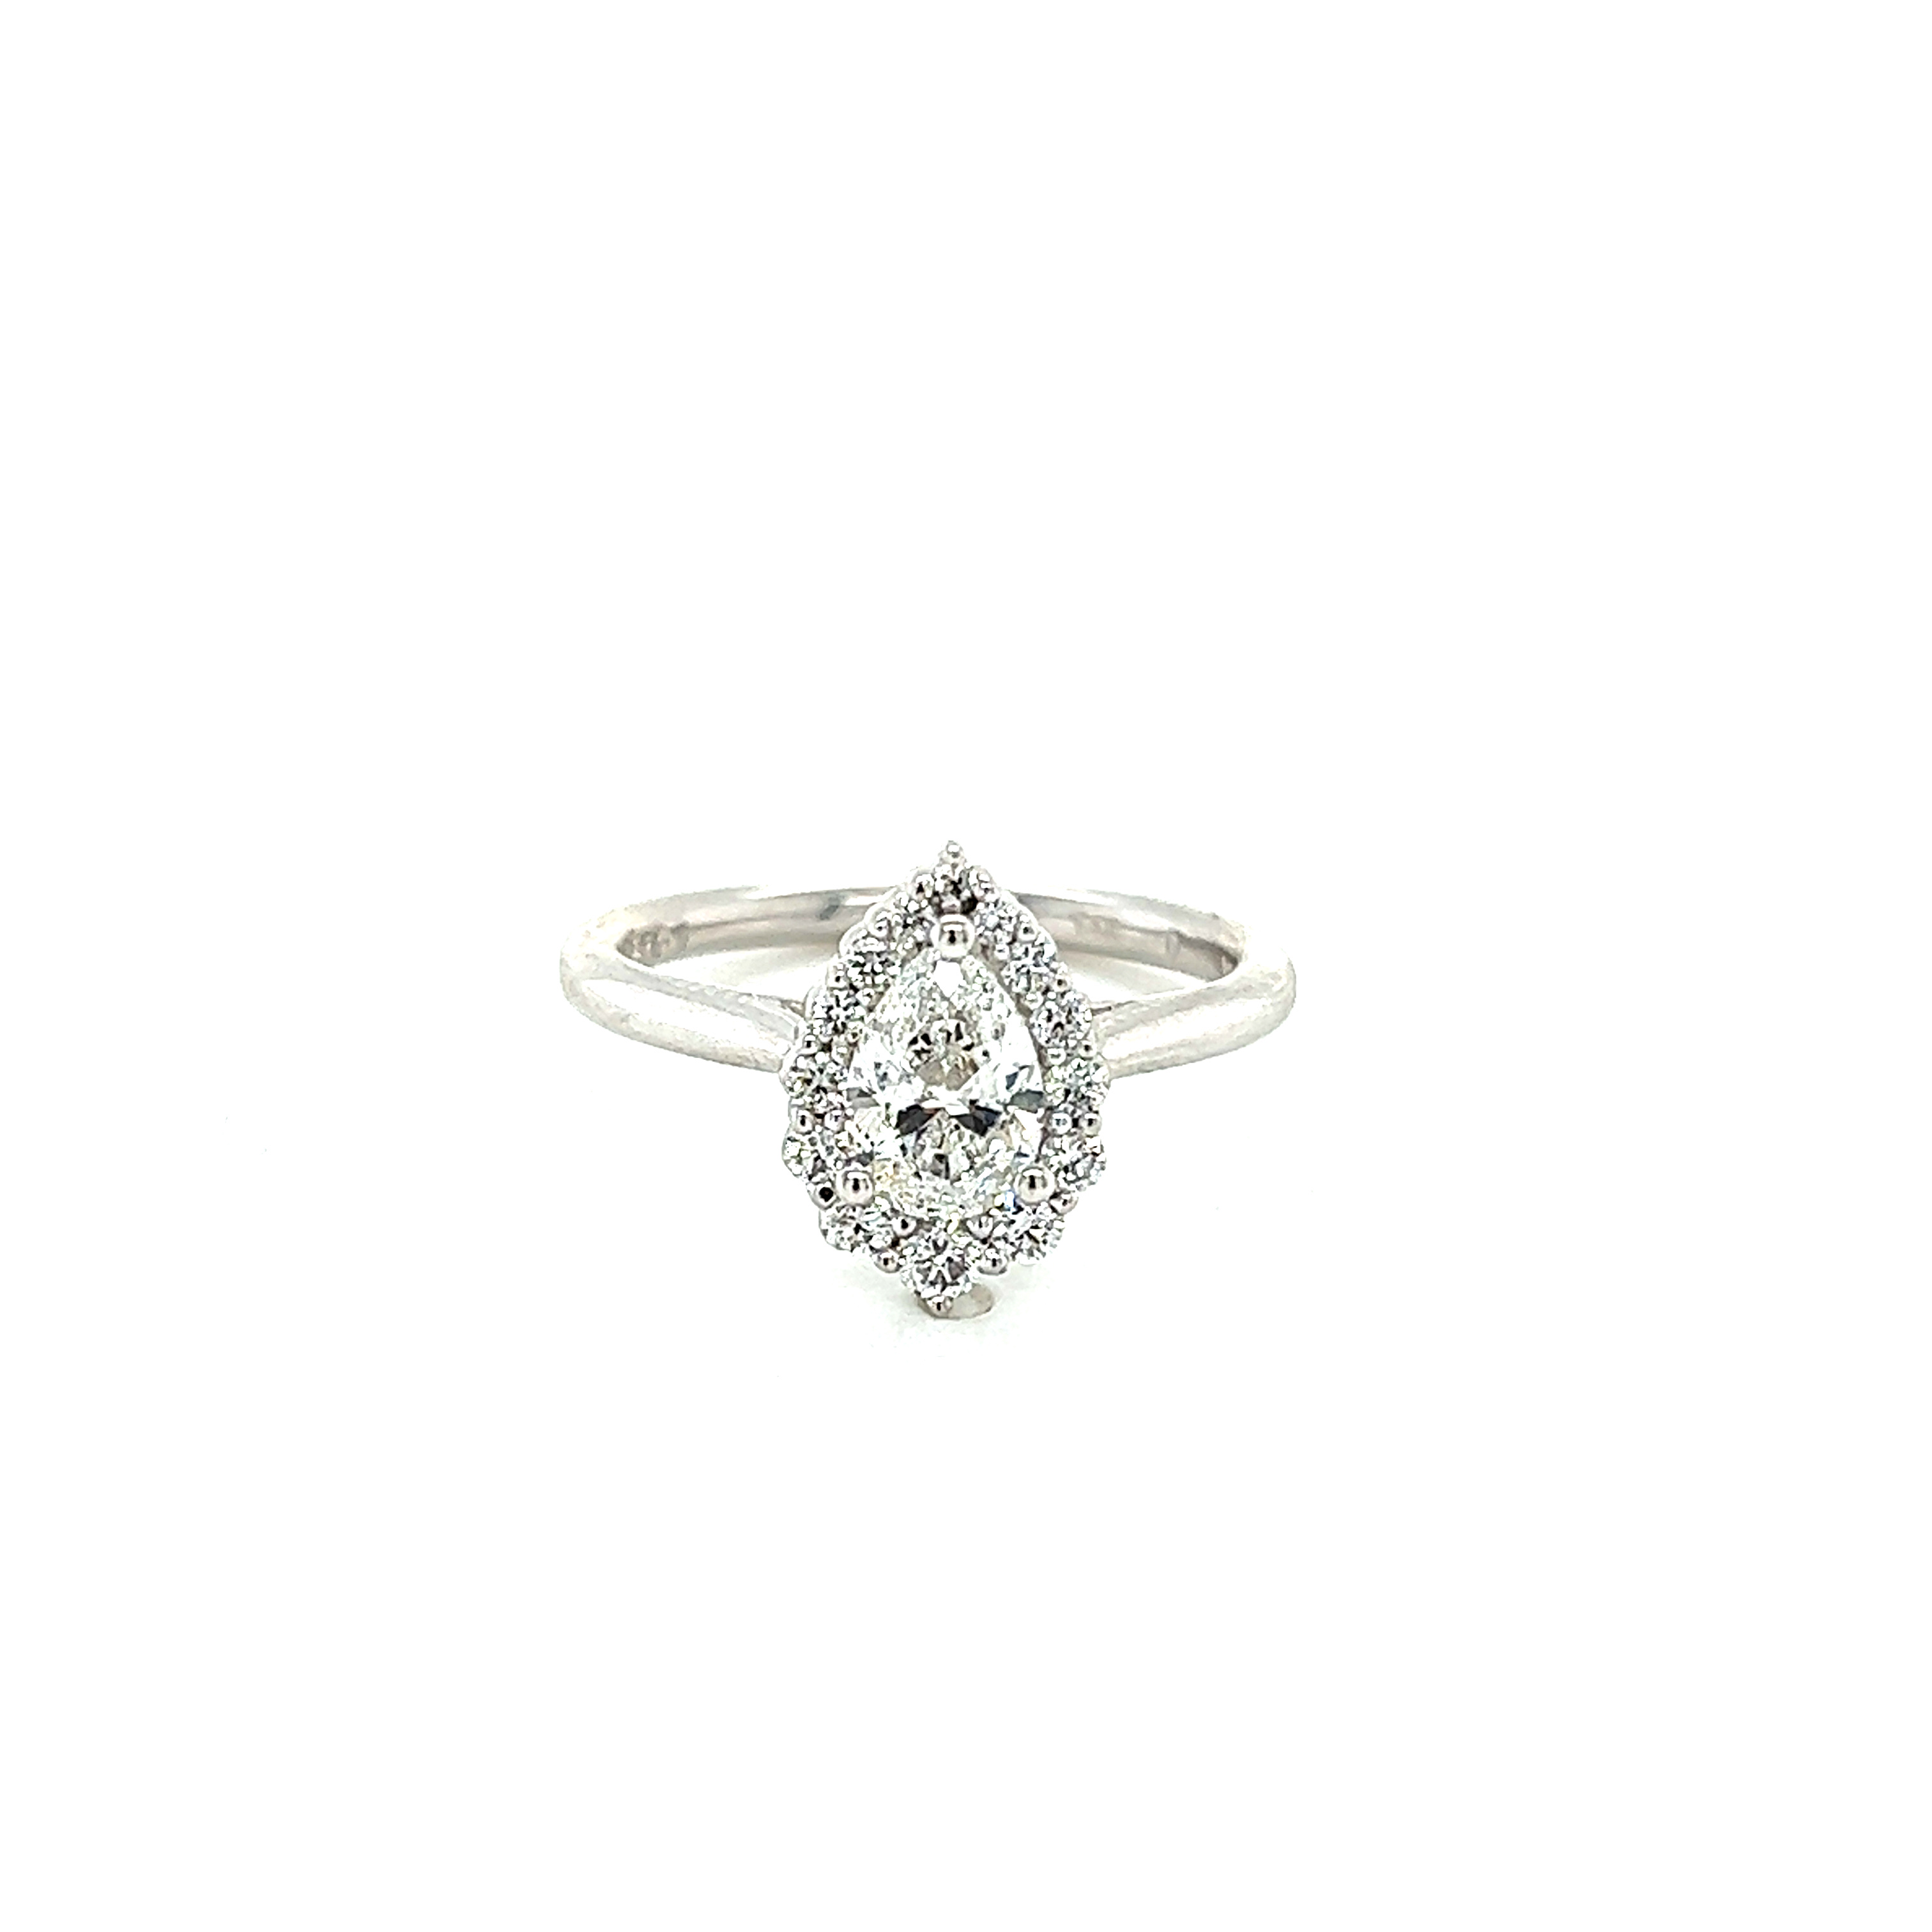 White 14 Karat Engagement Ring WITH one 0.70ct Pear F SI2 Diamond and   14=0.27tw Round Brilliant F SI Diamonds Style: Halo Solitaire